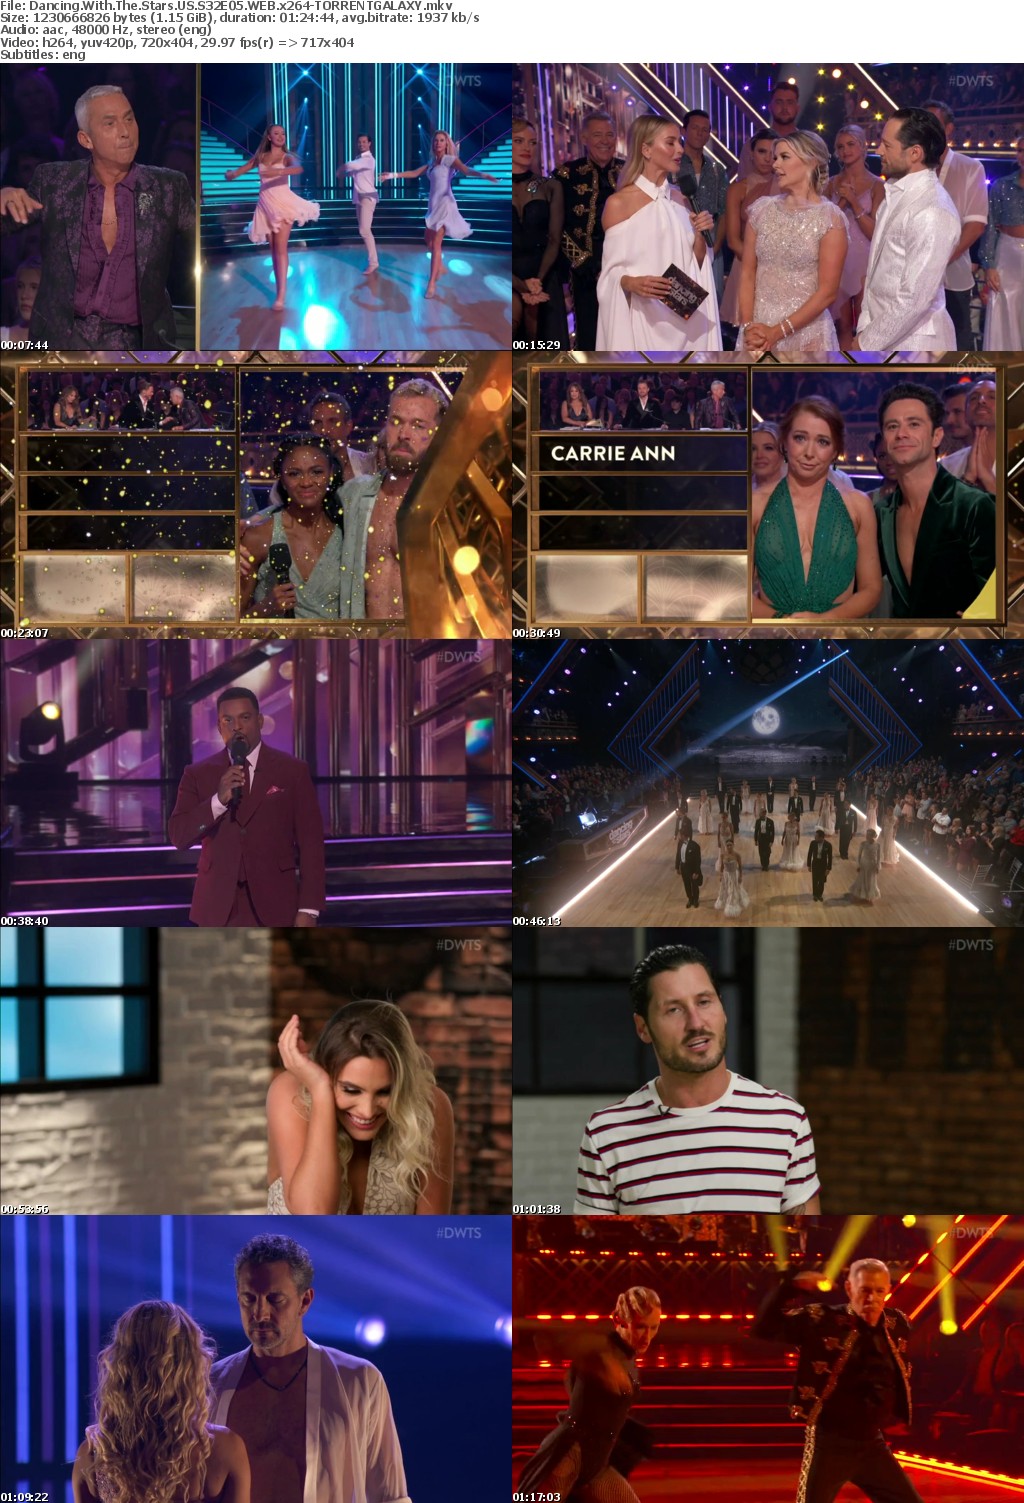 Dancing With The Stars US S32E05 WEB x264-GALAXY